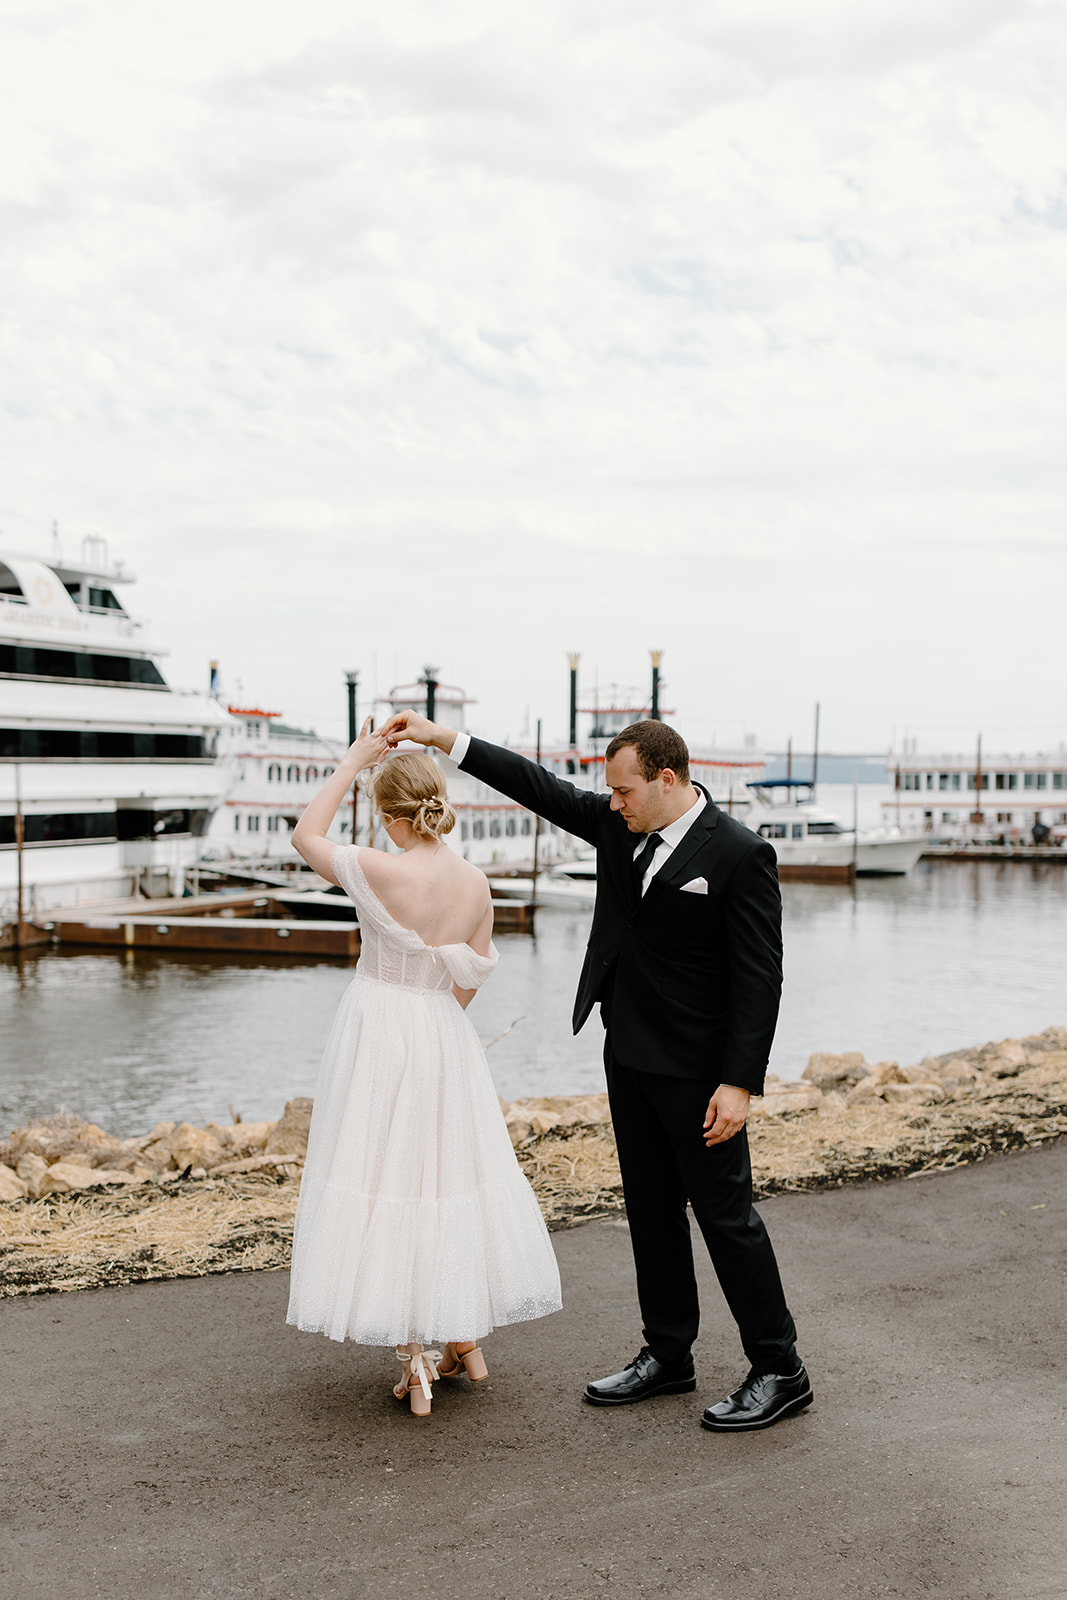 Groom twirls his bride in front of a yacht